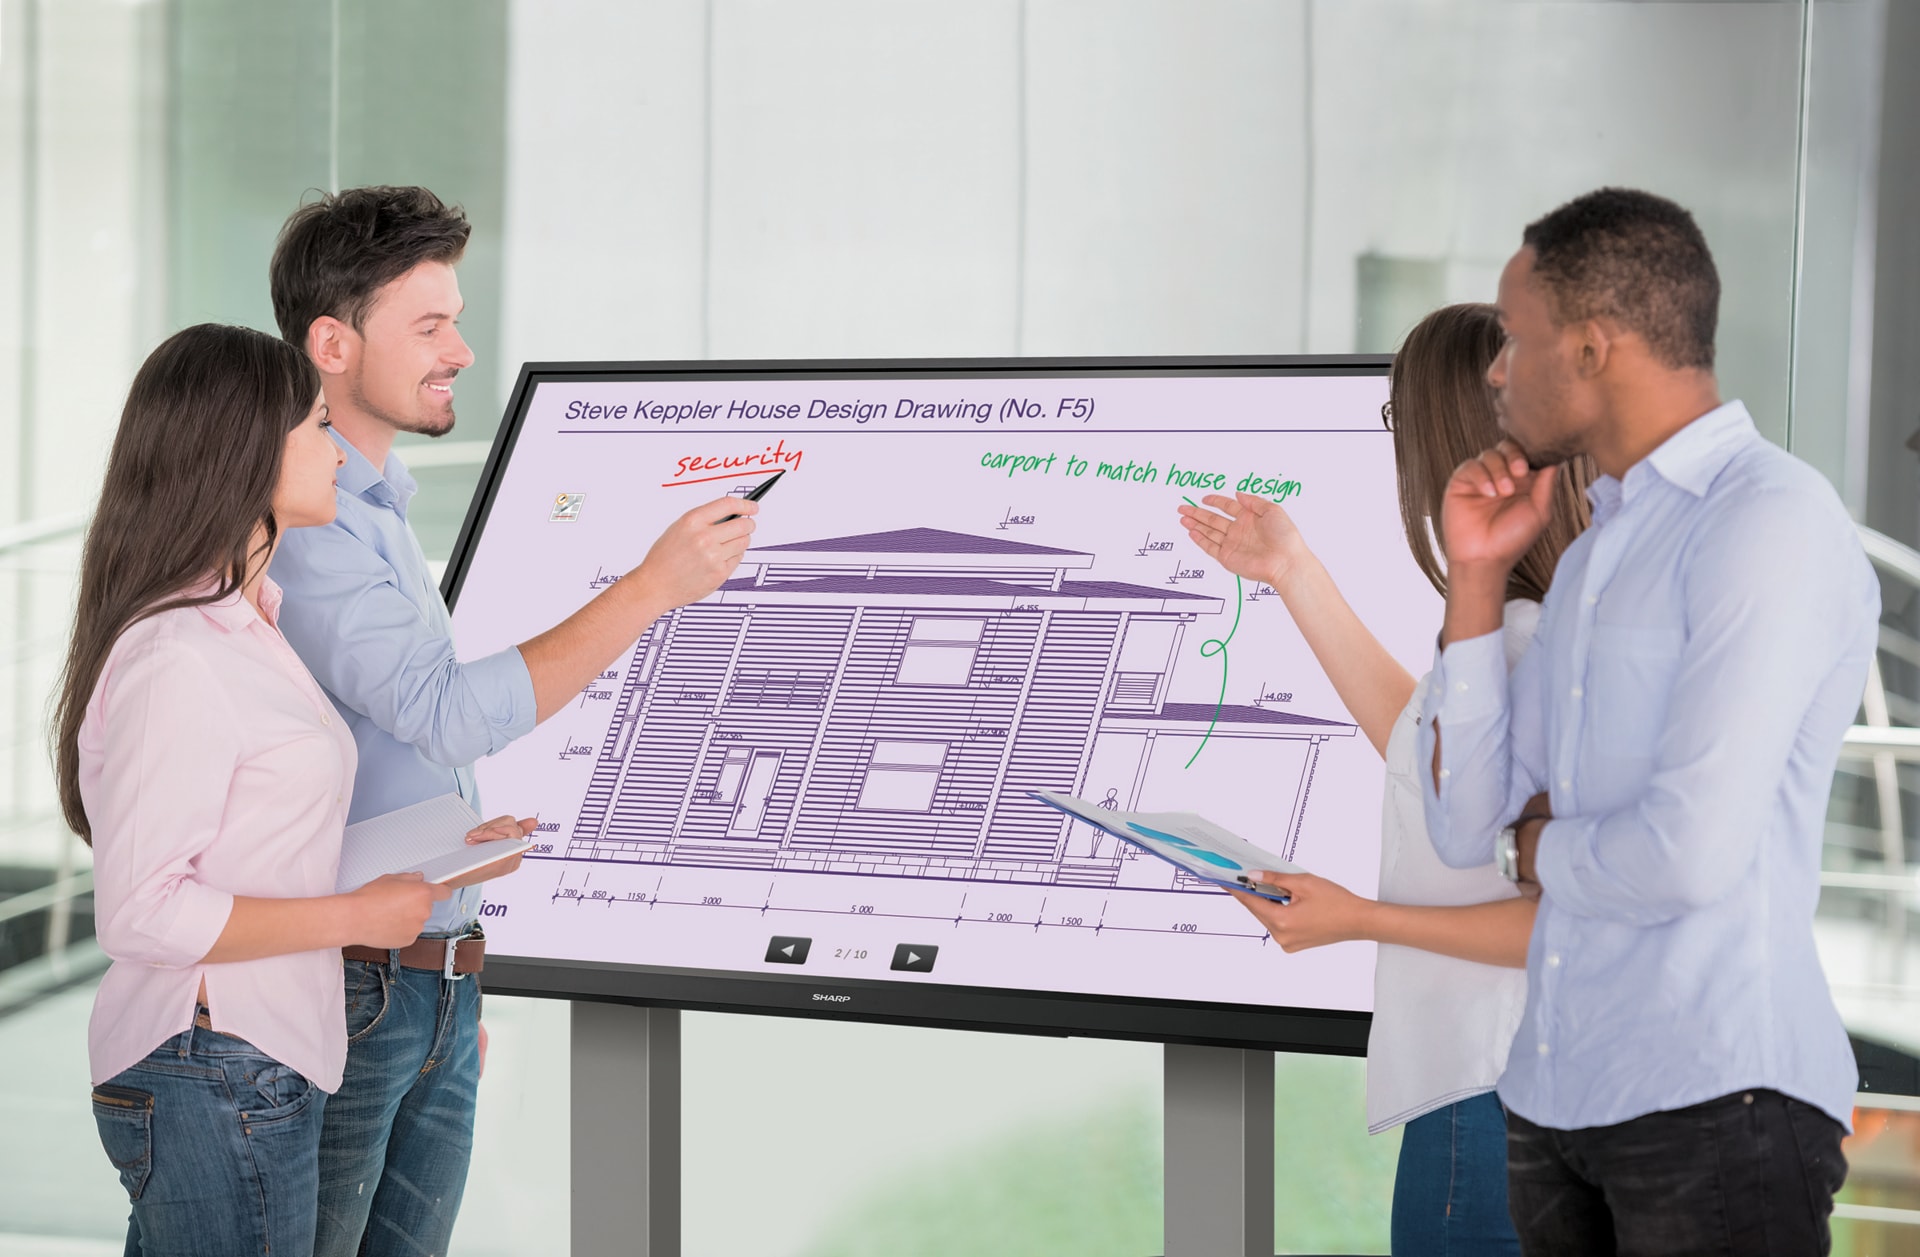 Sharp/NEC's Collaboration Display Solutions showing team sketching plan